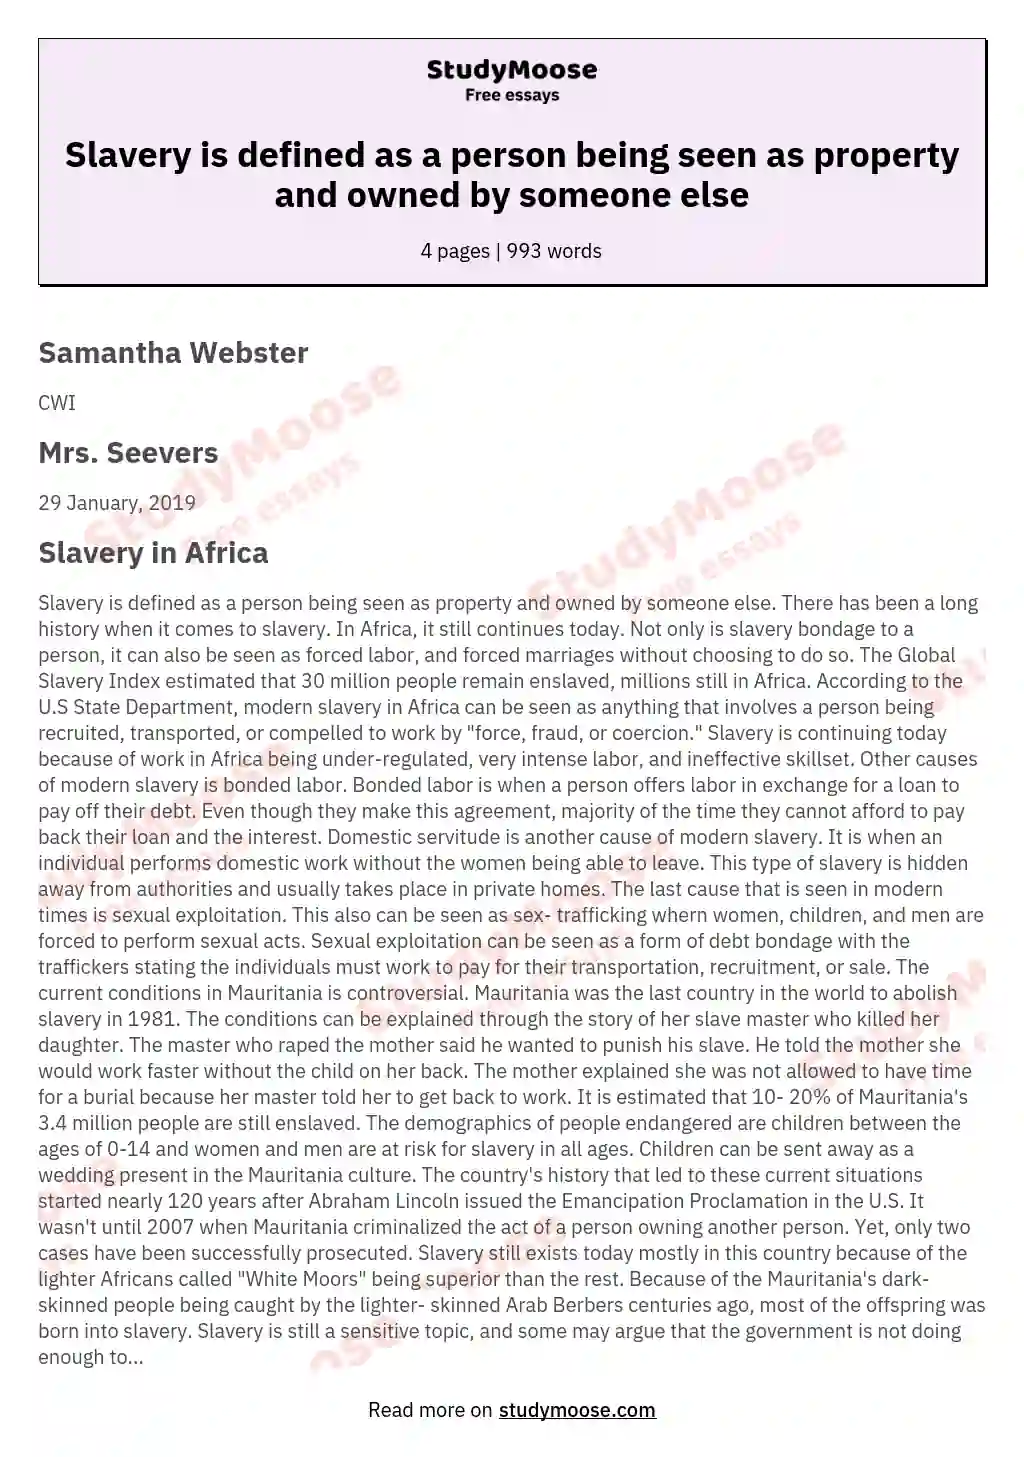 Slavery is defined as a person being seen as property and owned by someone else essay